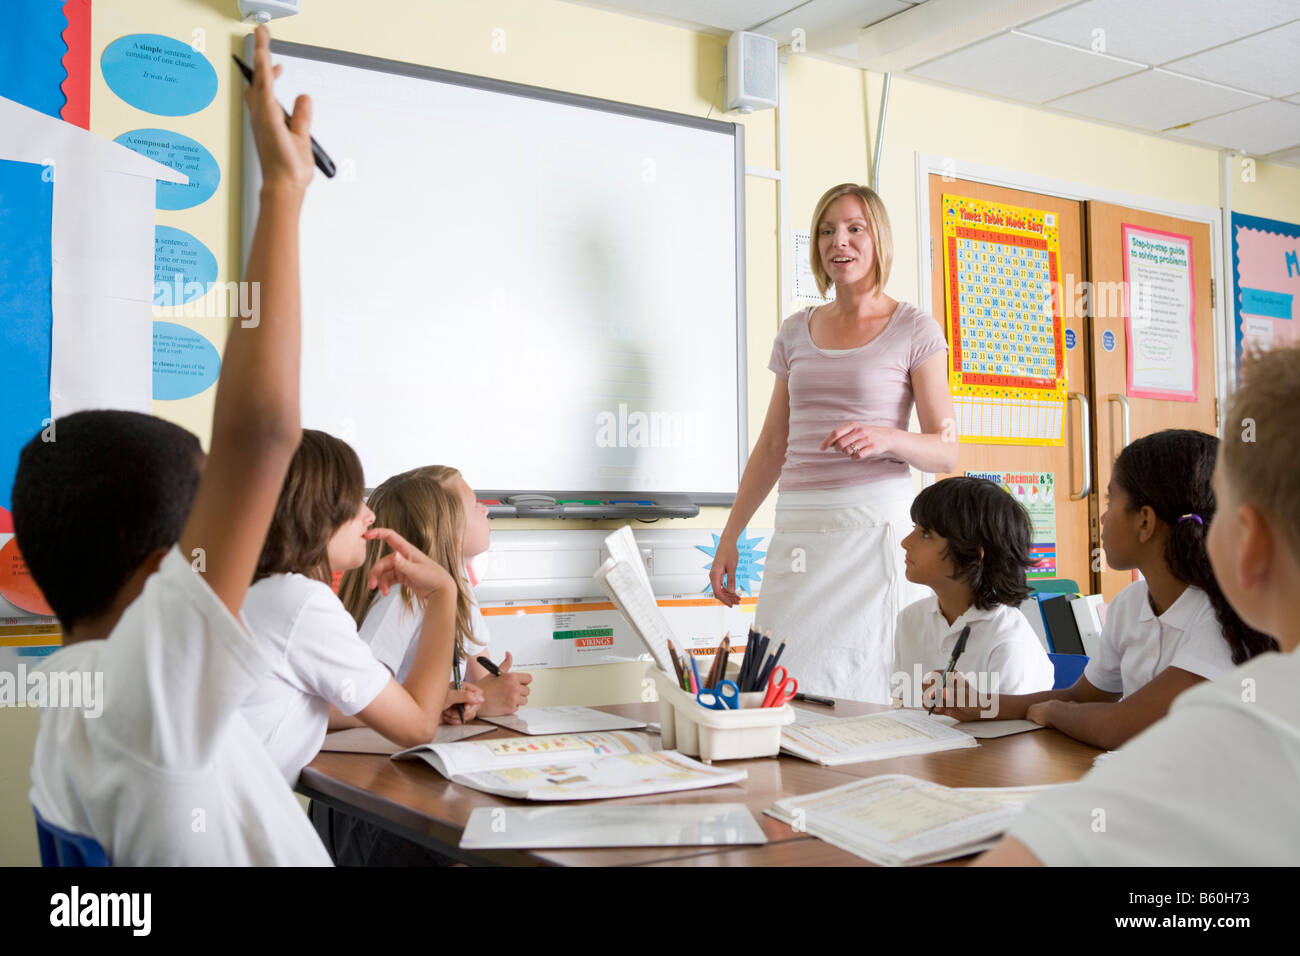 Student volunteering in class with teacher at board Stock Photo